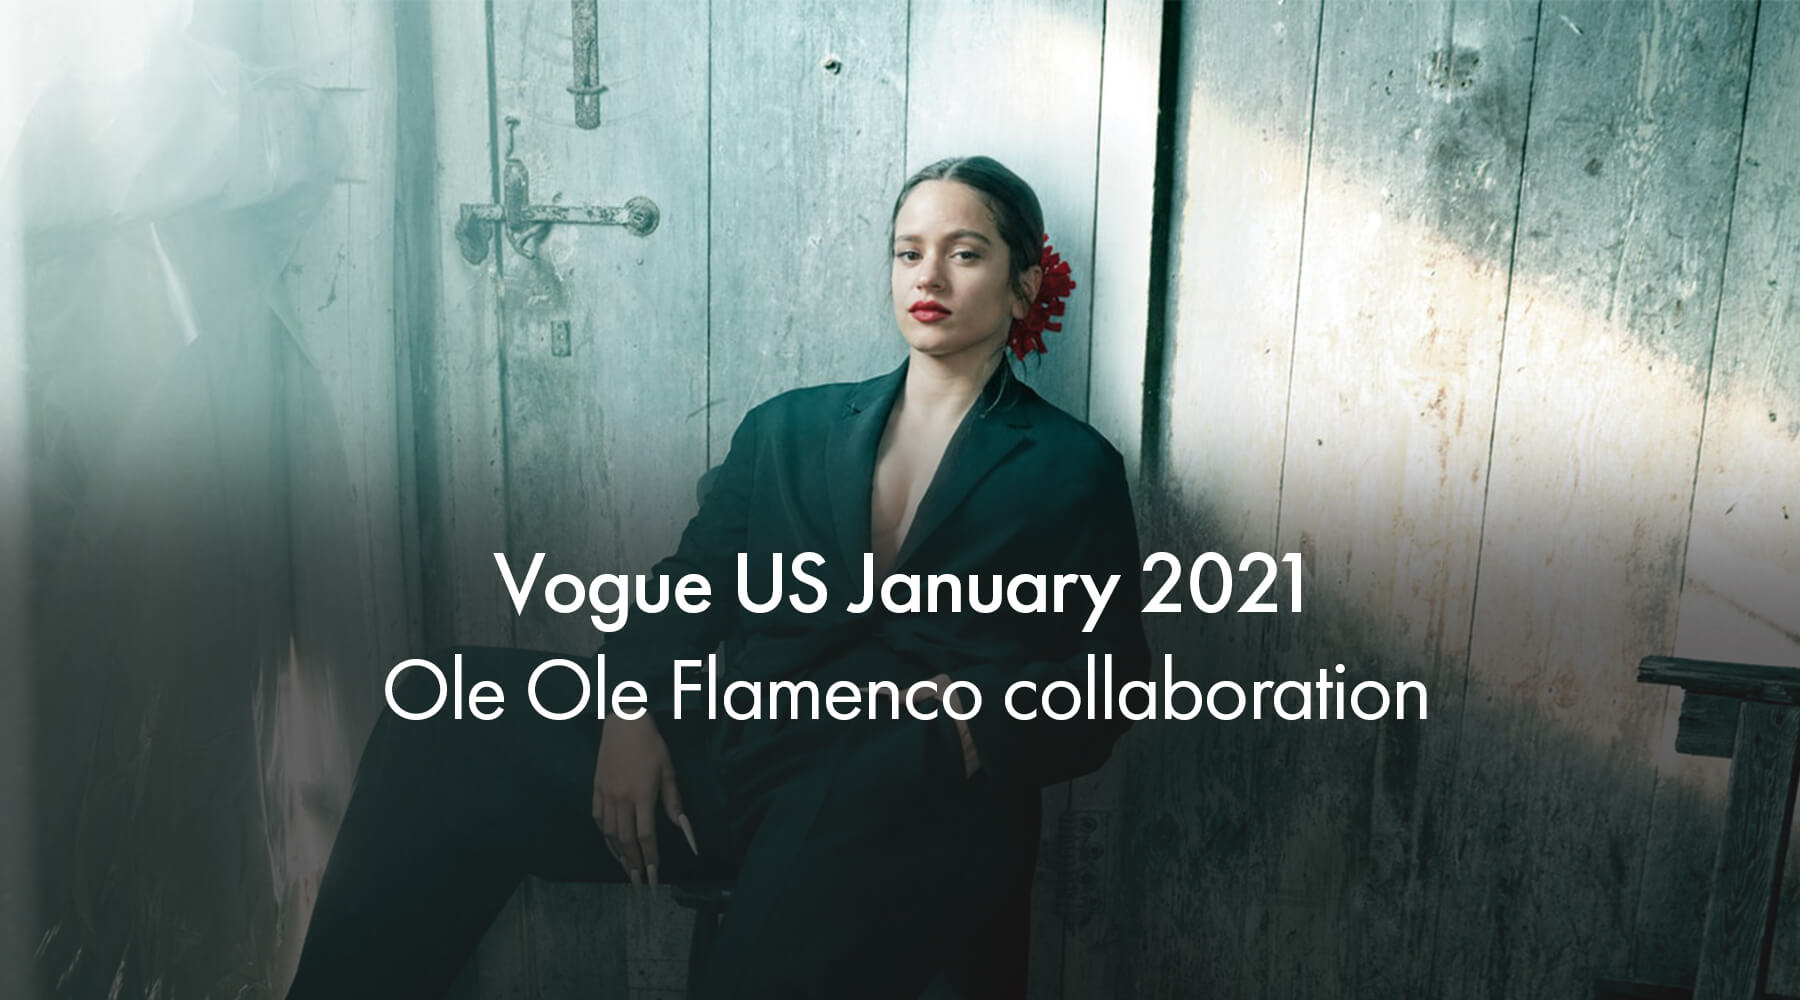 Vogue US January 2021 Ole Ole Flamenco collaboration "Rosalía on Ambition, Writing her New Album, and Embracing Extremes"